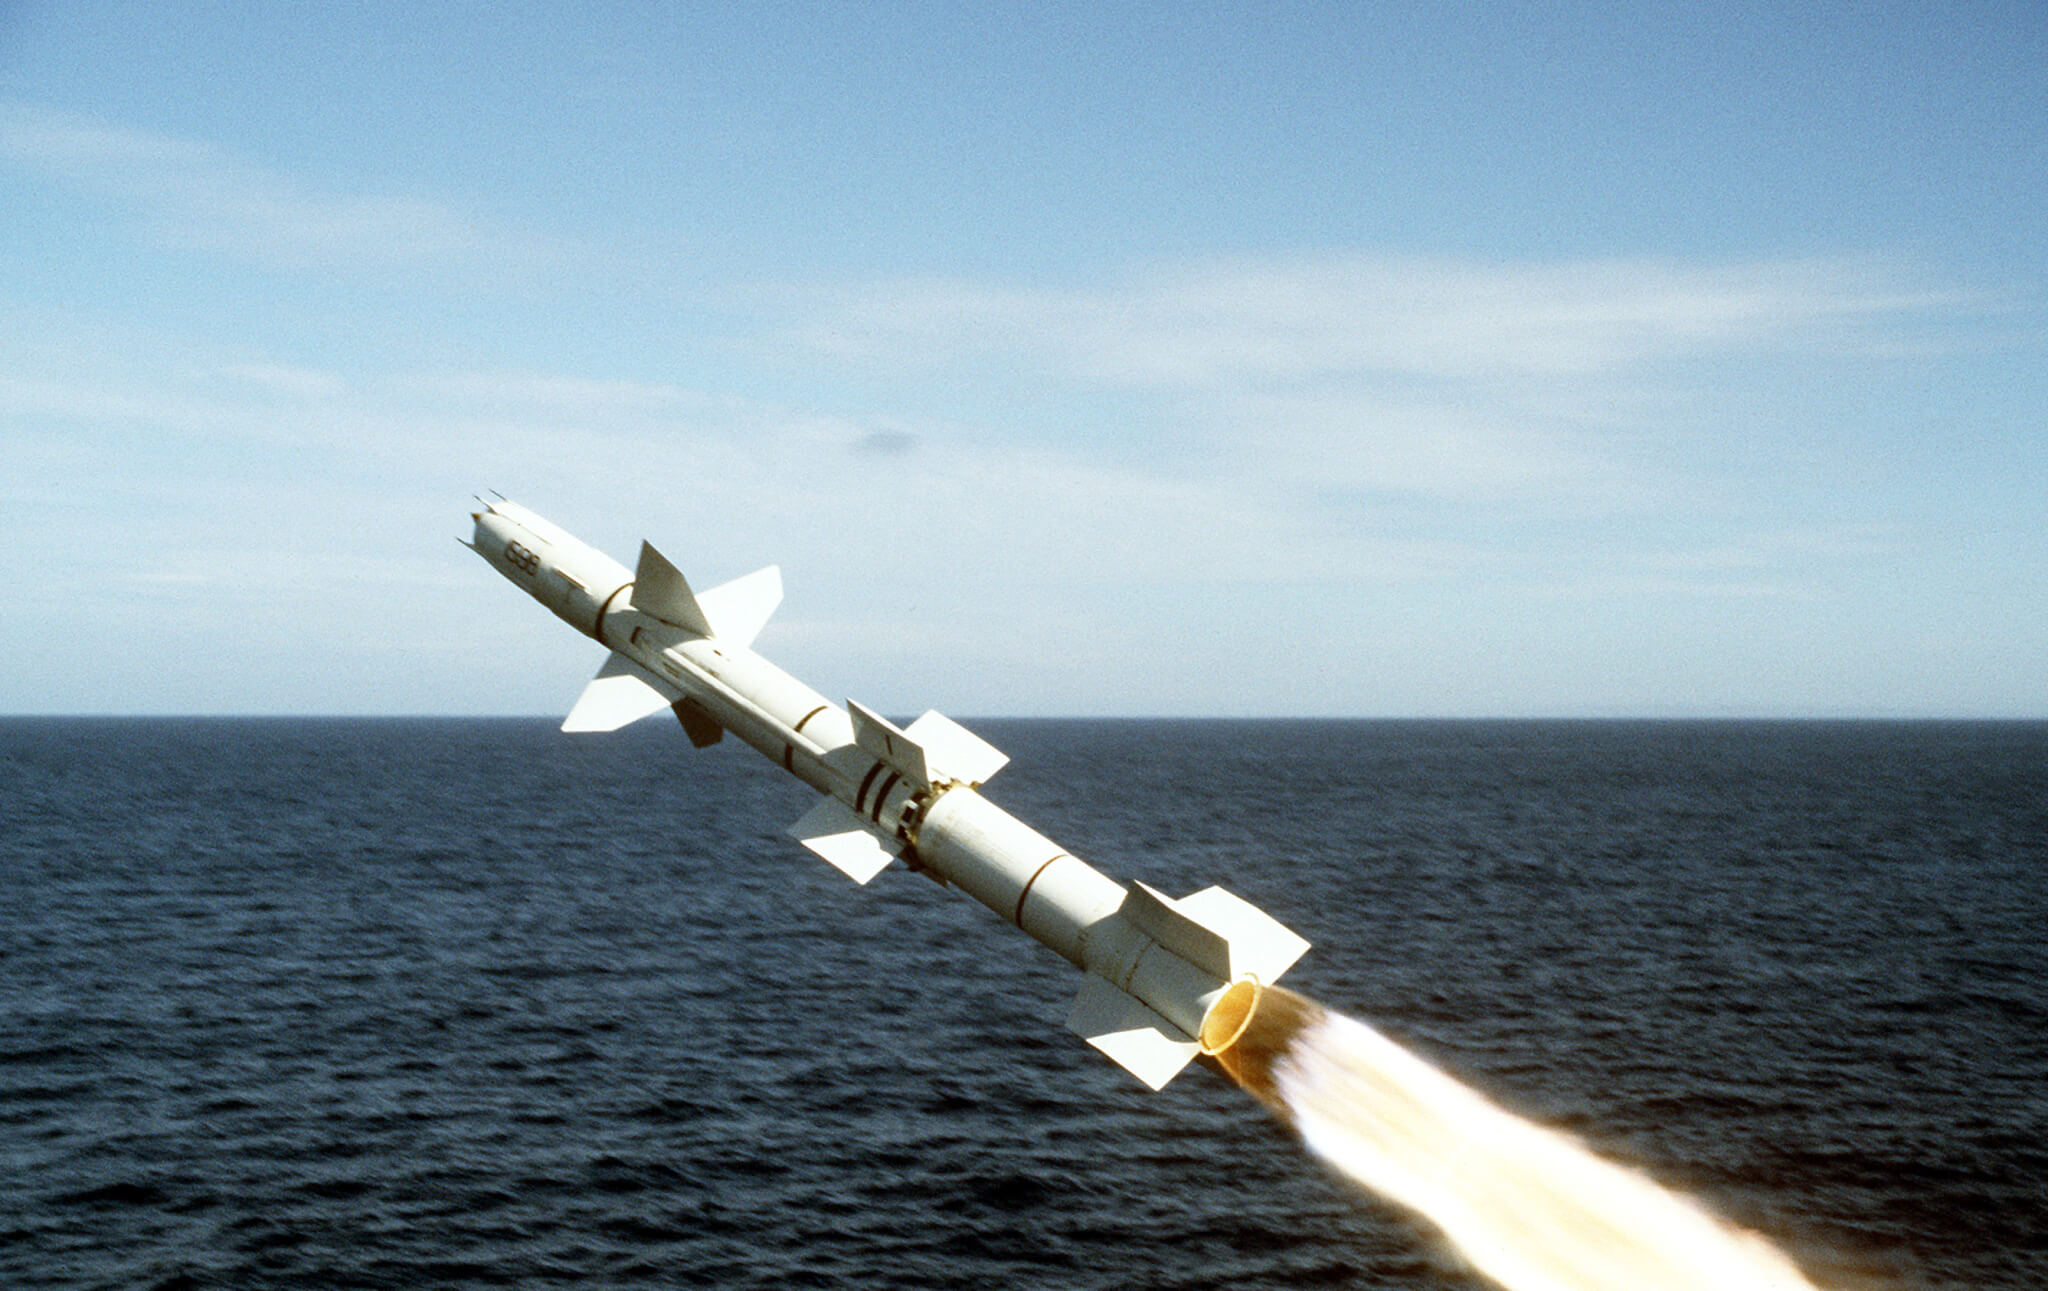 Side view of a Talos surface-to-air missile, just after being fired from the guided missile cruiser USS OKLAHOMA CITY (CG-5).